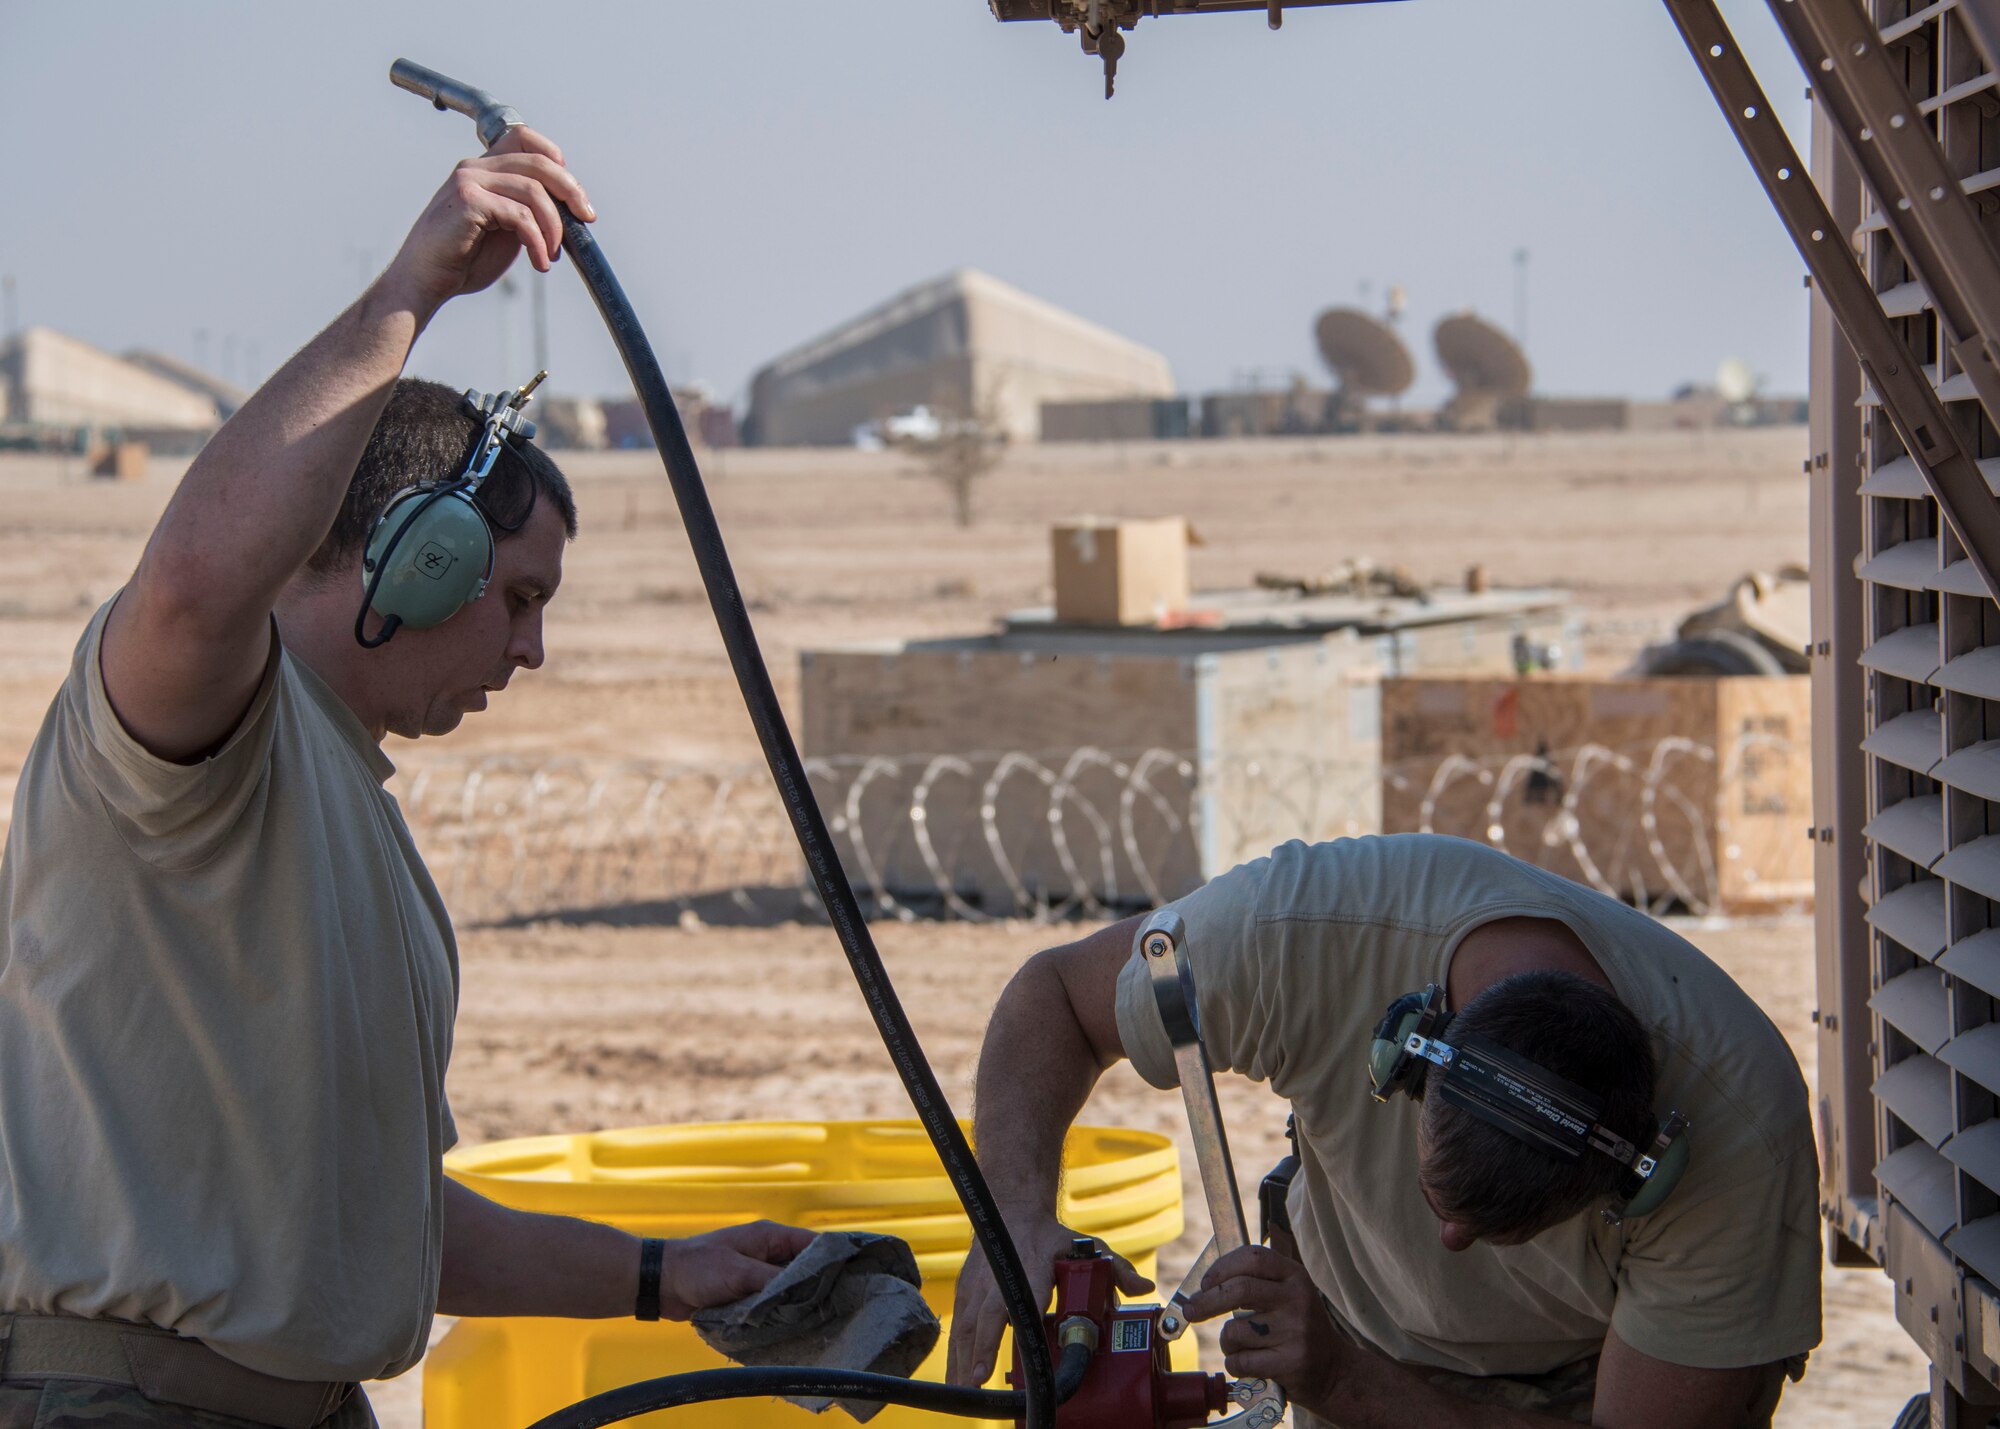 Staff Sgt. Abraham Wanner, a 370th Air Expeditionary Advisory Group Detachment 1 power production craftsman, left, and Staff Sgt. Gregory Speed, a 370th AEAG/Det 1 electrician craftsman, right, install a hand pump on an oil barrel at Al Asad Air Base, Iraq Jan. 8, 2017. Running the generators nonstop requires frequent servicing. (U.S. Air Force photo/Senior Airman Andrew Park)